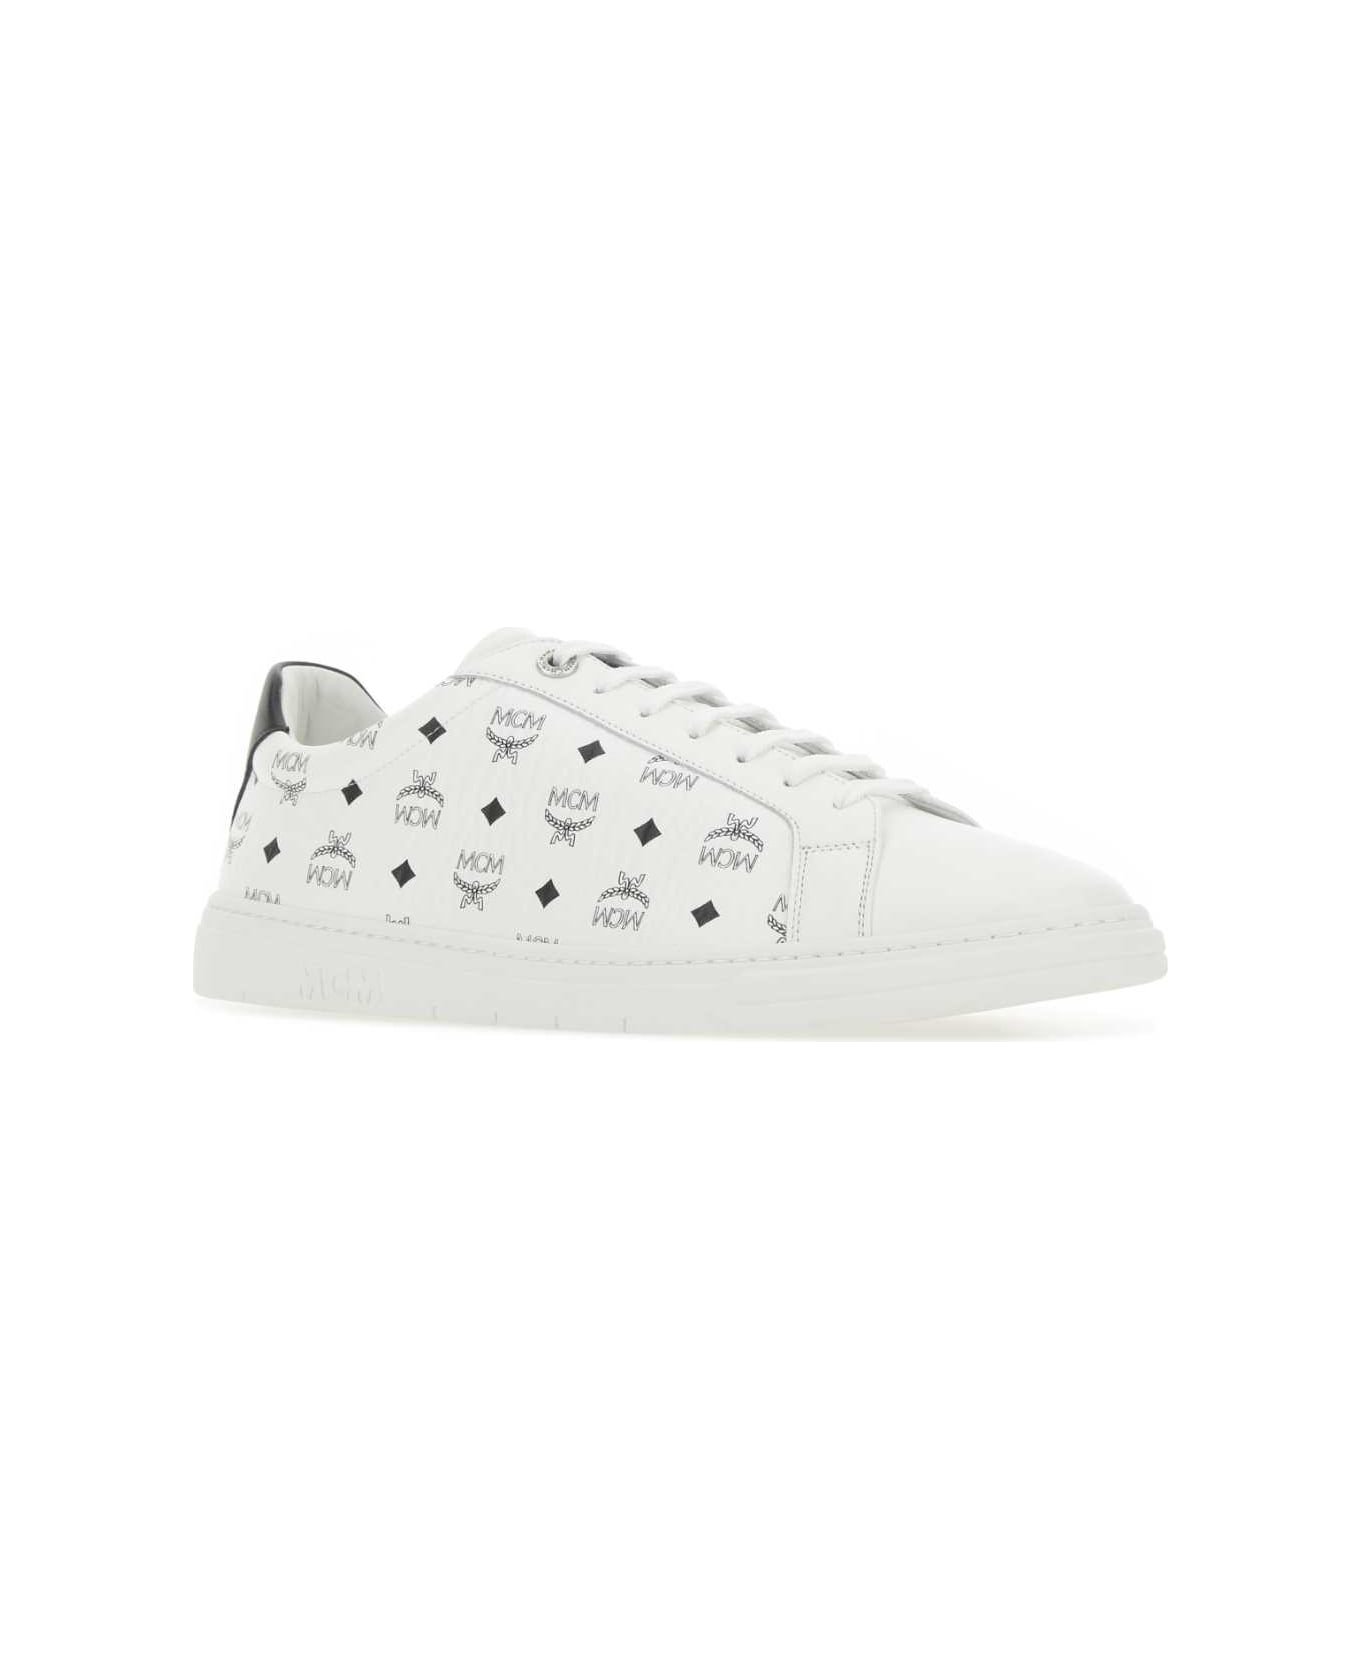 MCM White Canvas And Leather Terrain Sneakers - WHITE